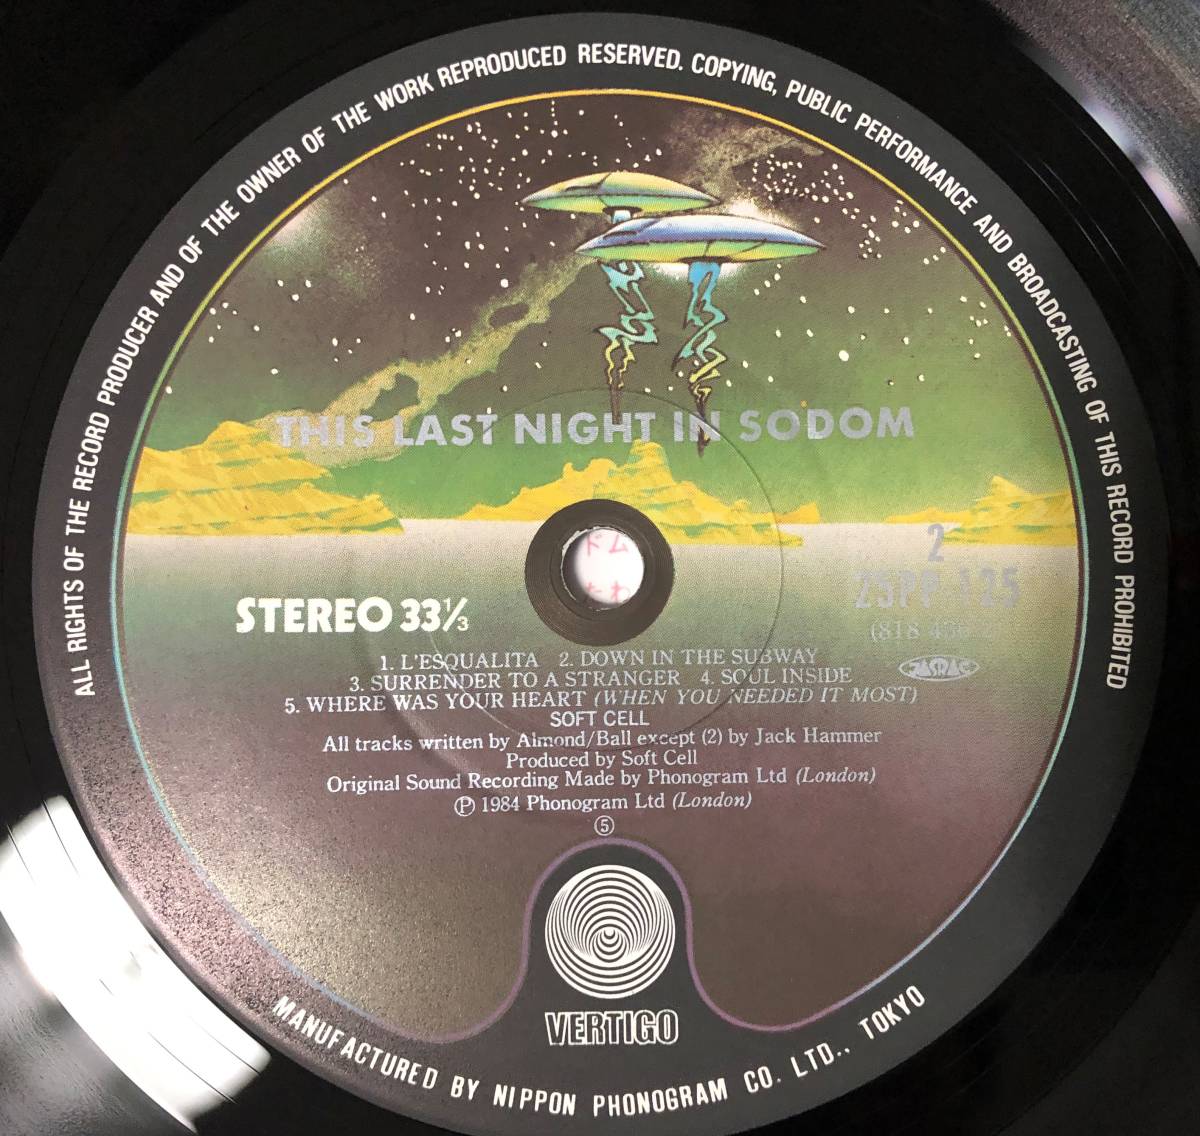 LP【New Wave】Soft Cell / This Last Night In Sodom【25PP-125 希少！国内盤帯付き・Marc Almon・ソフトセル・ソドムの夜】の画像4